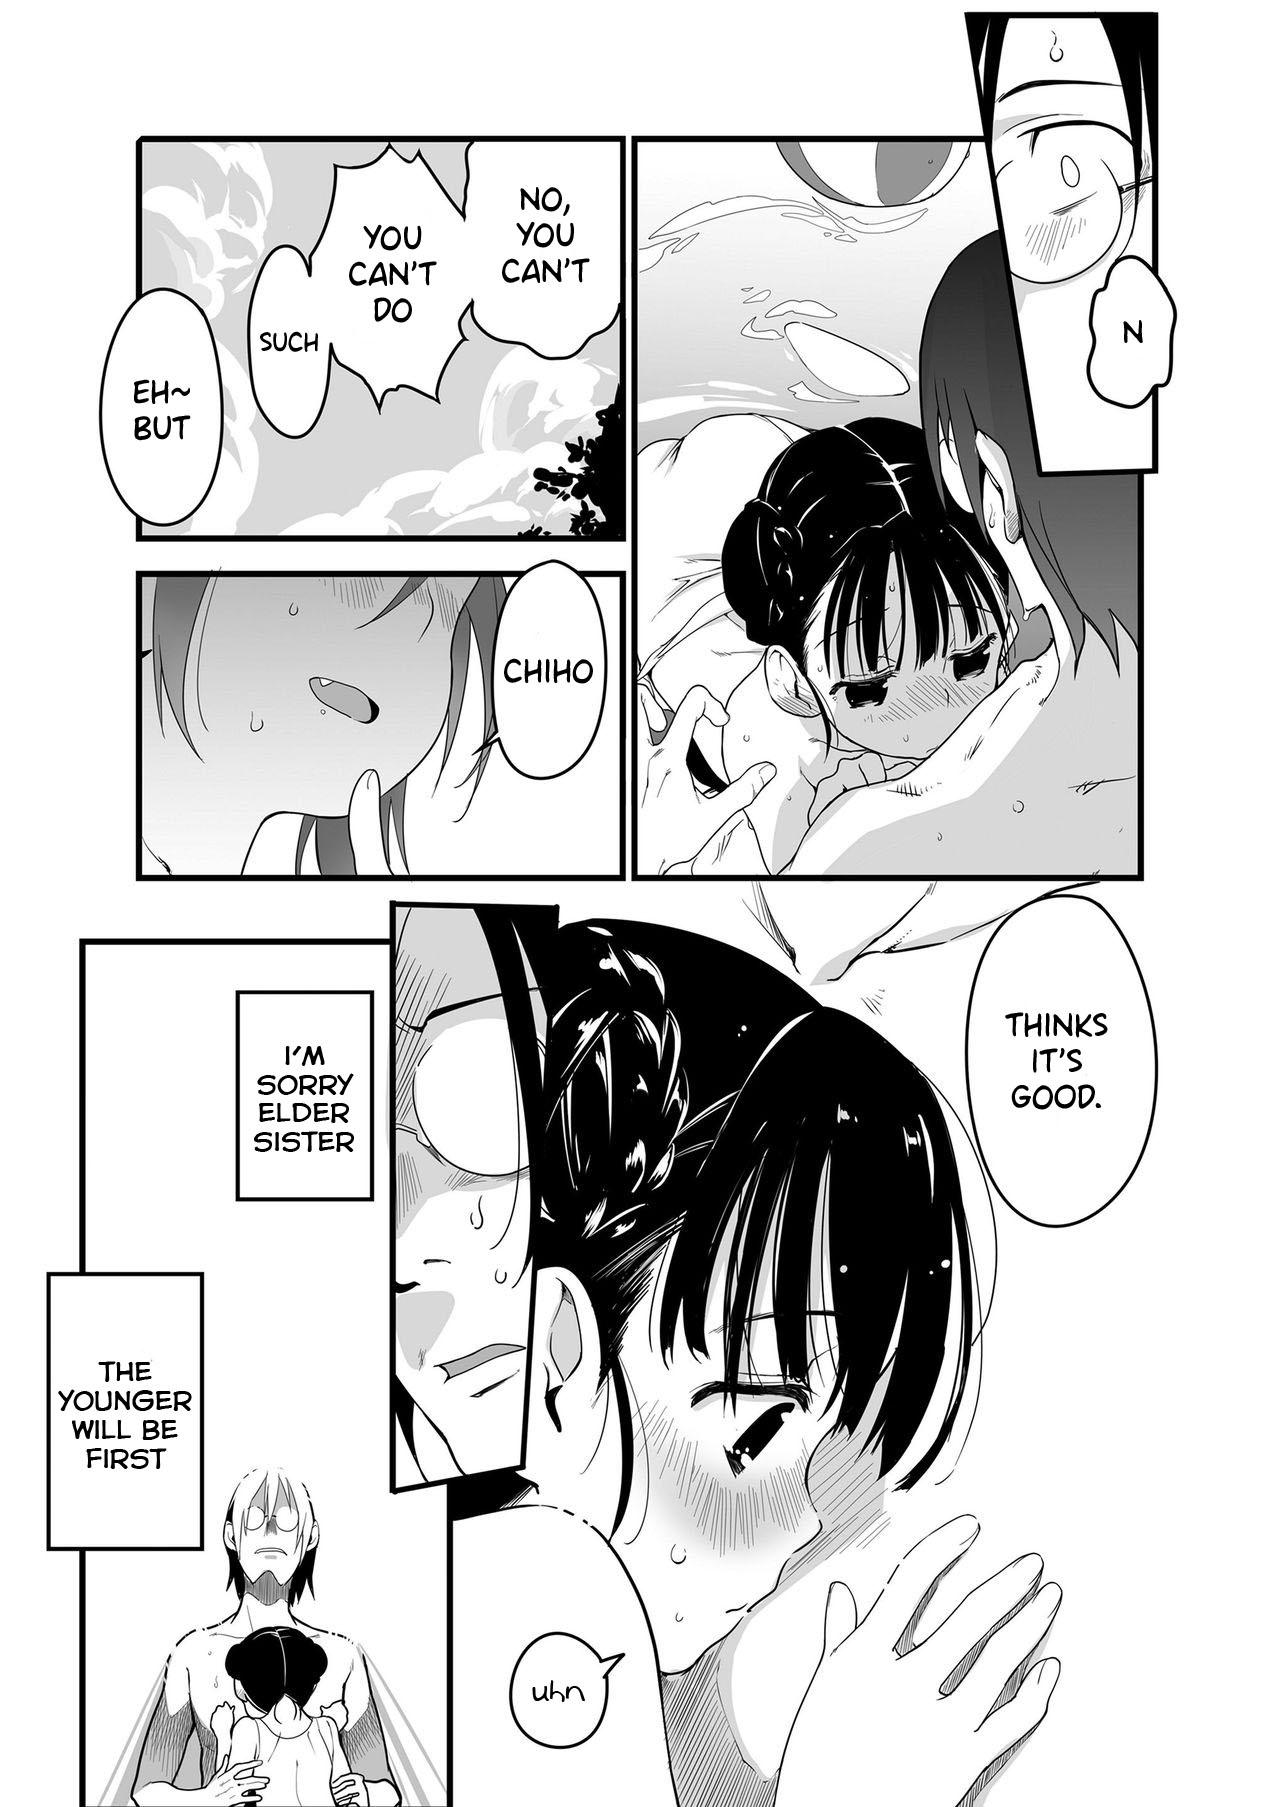 Sofa Uchiage Hanabi, Ane to Miruka? Imouto to Miruka? | Fireworks, Should we see it with the elder sister or the younger sister? Blondes - Page 9